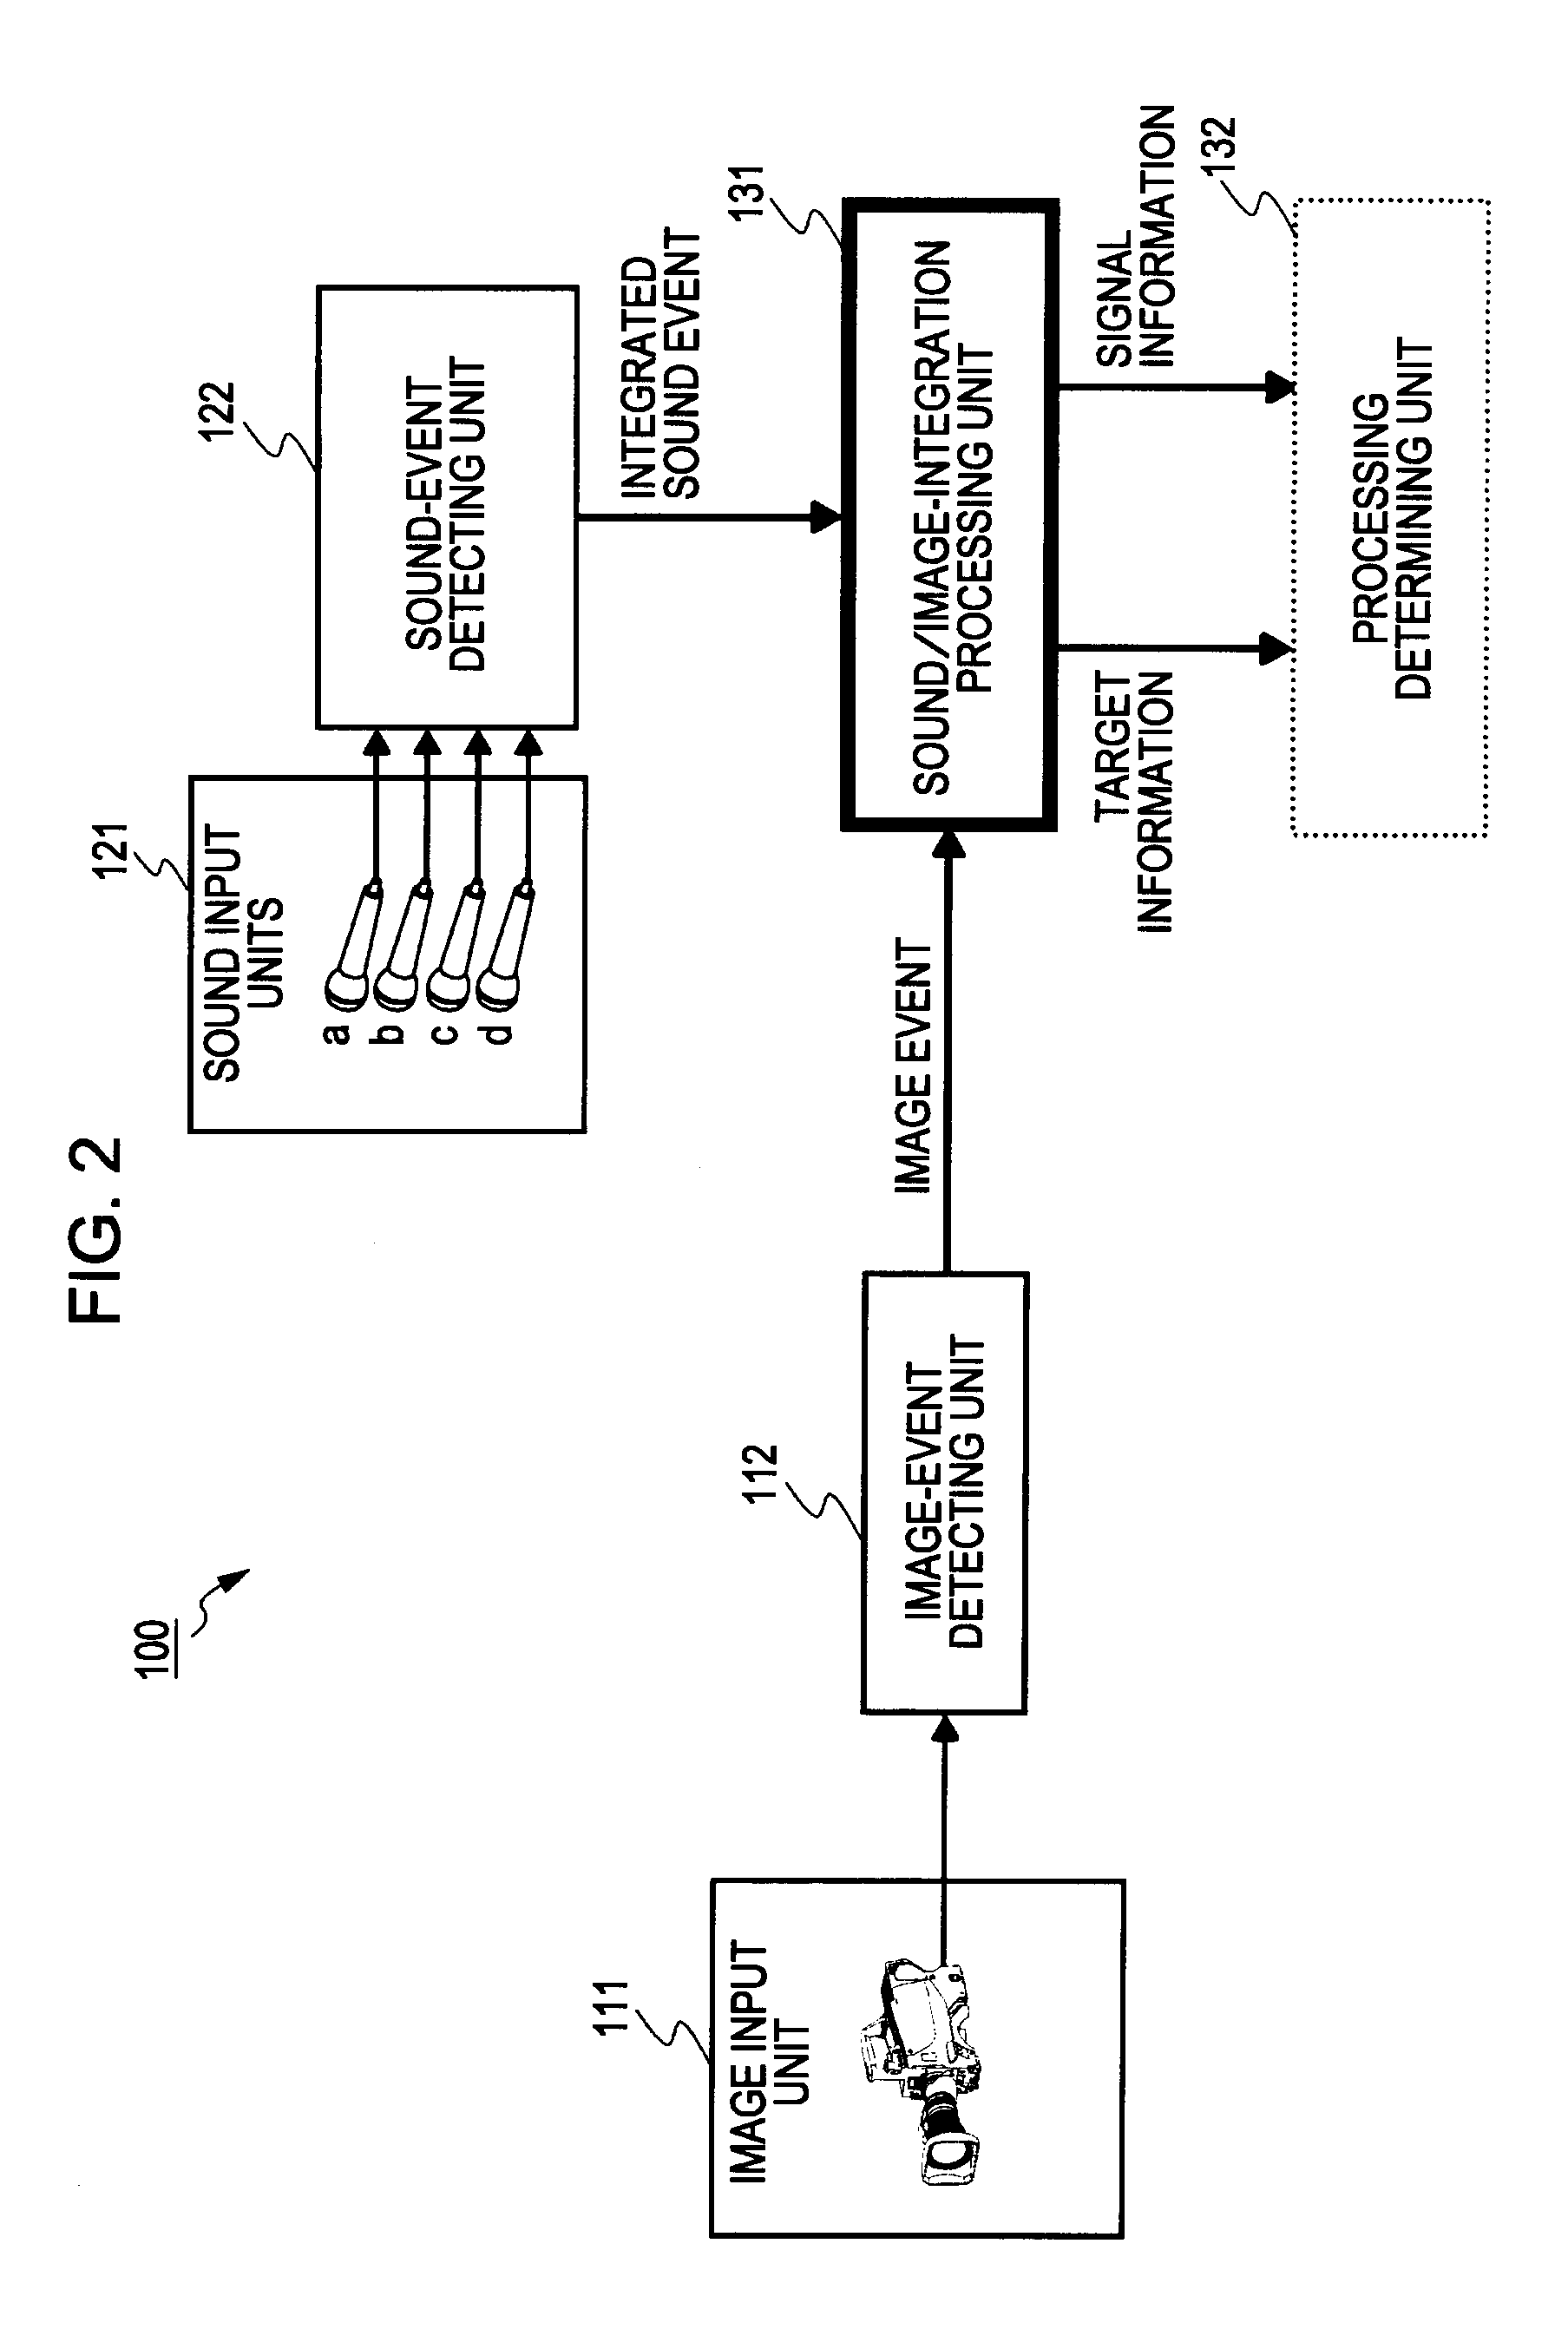 Image Processing Apparatus, Image Processing Method, and Computer Program